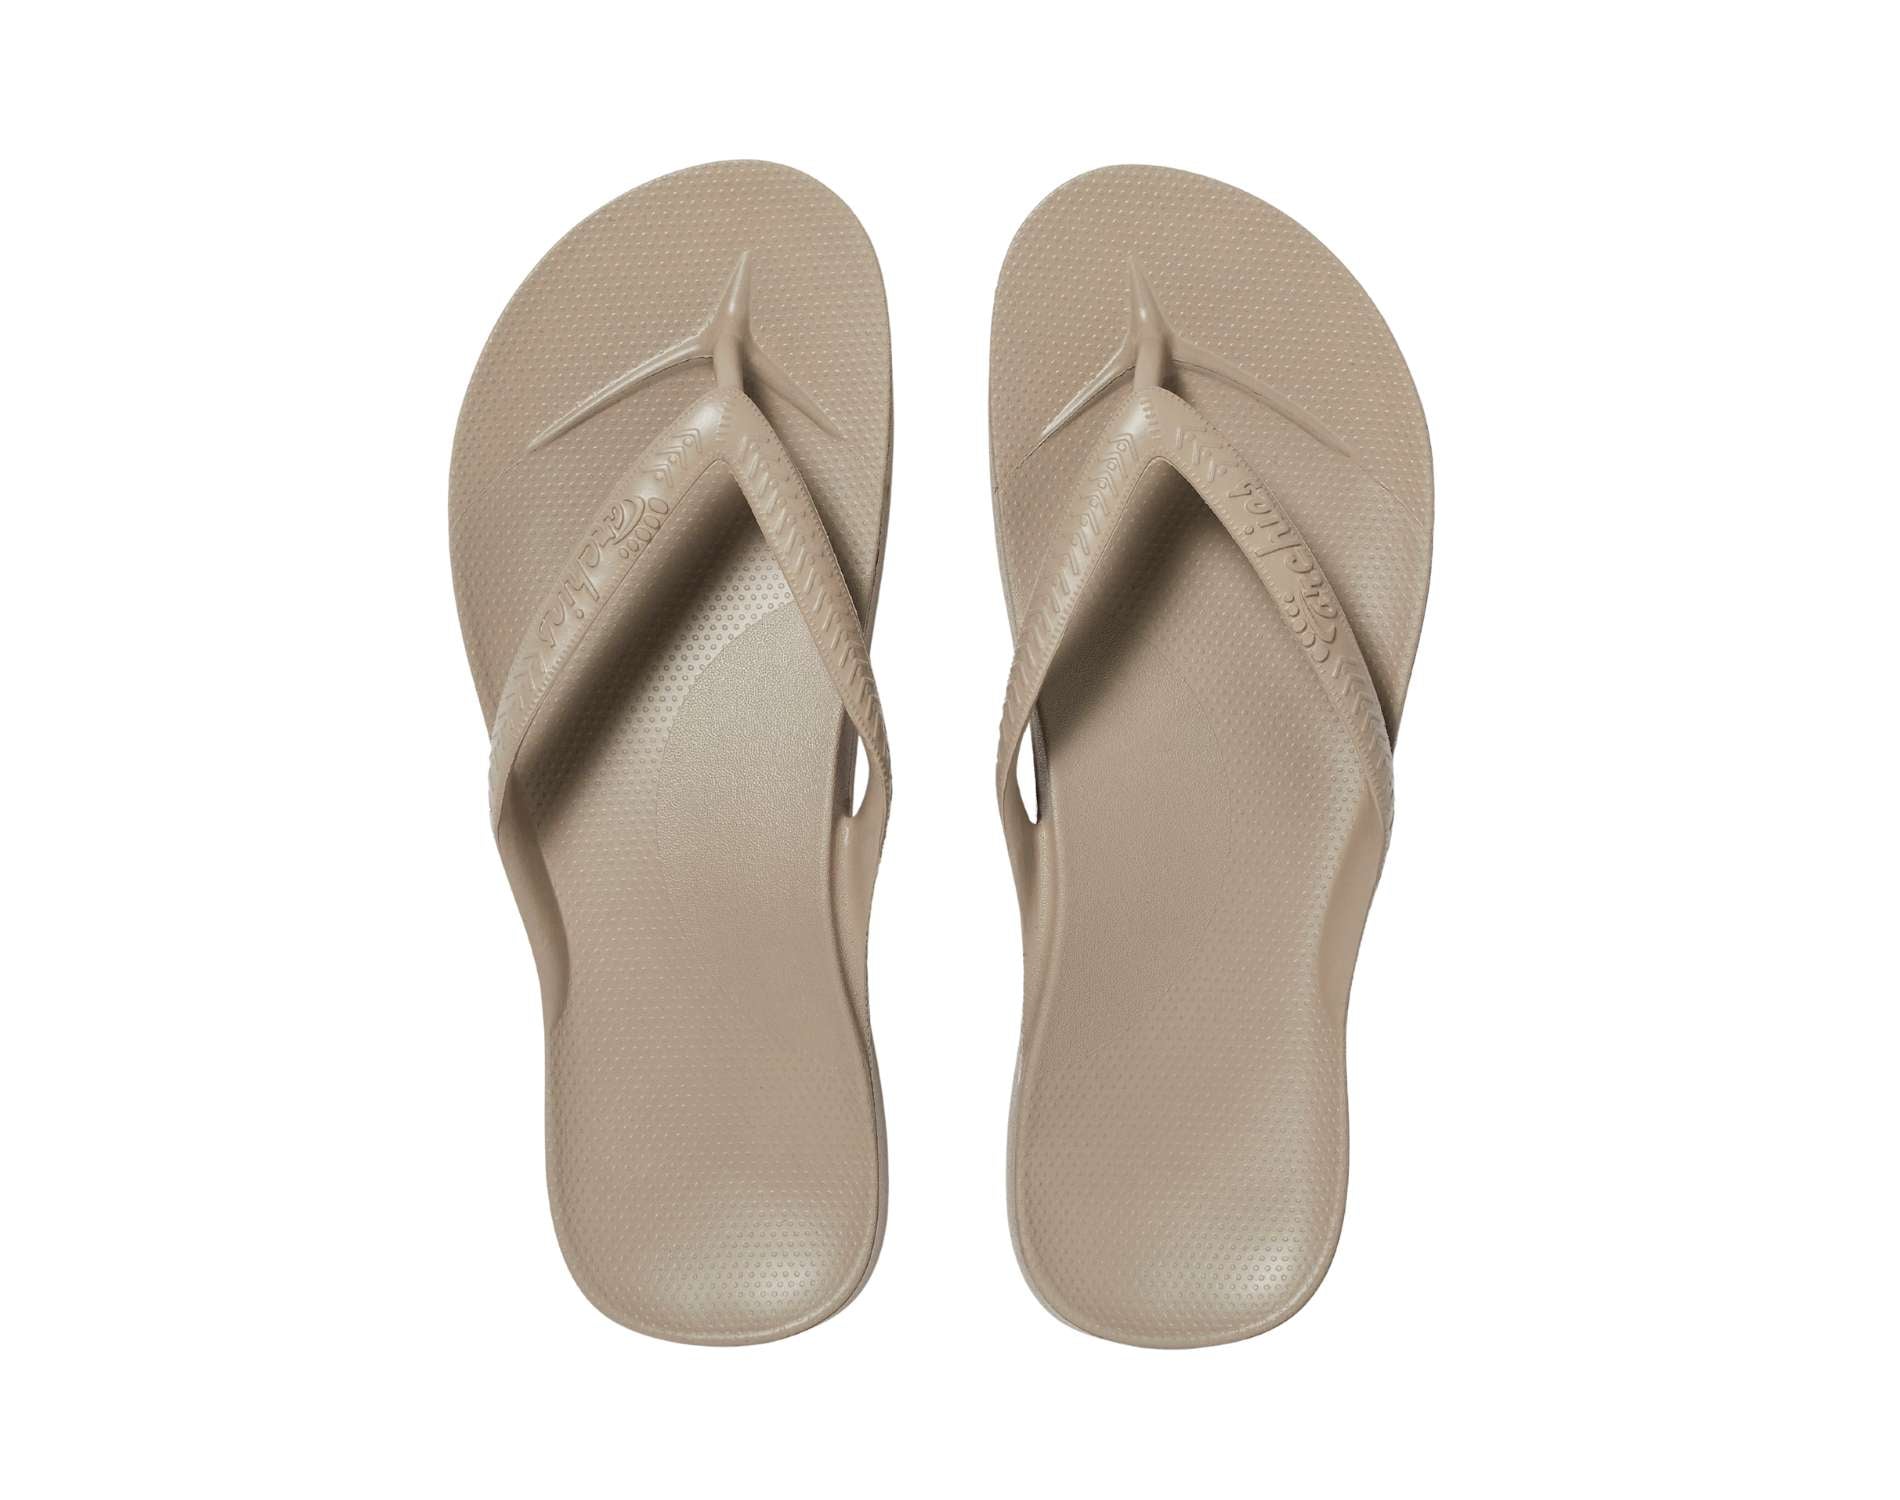 Archies arch support thongs in taupe colour